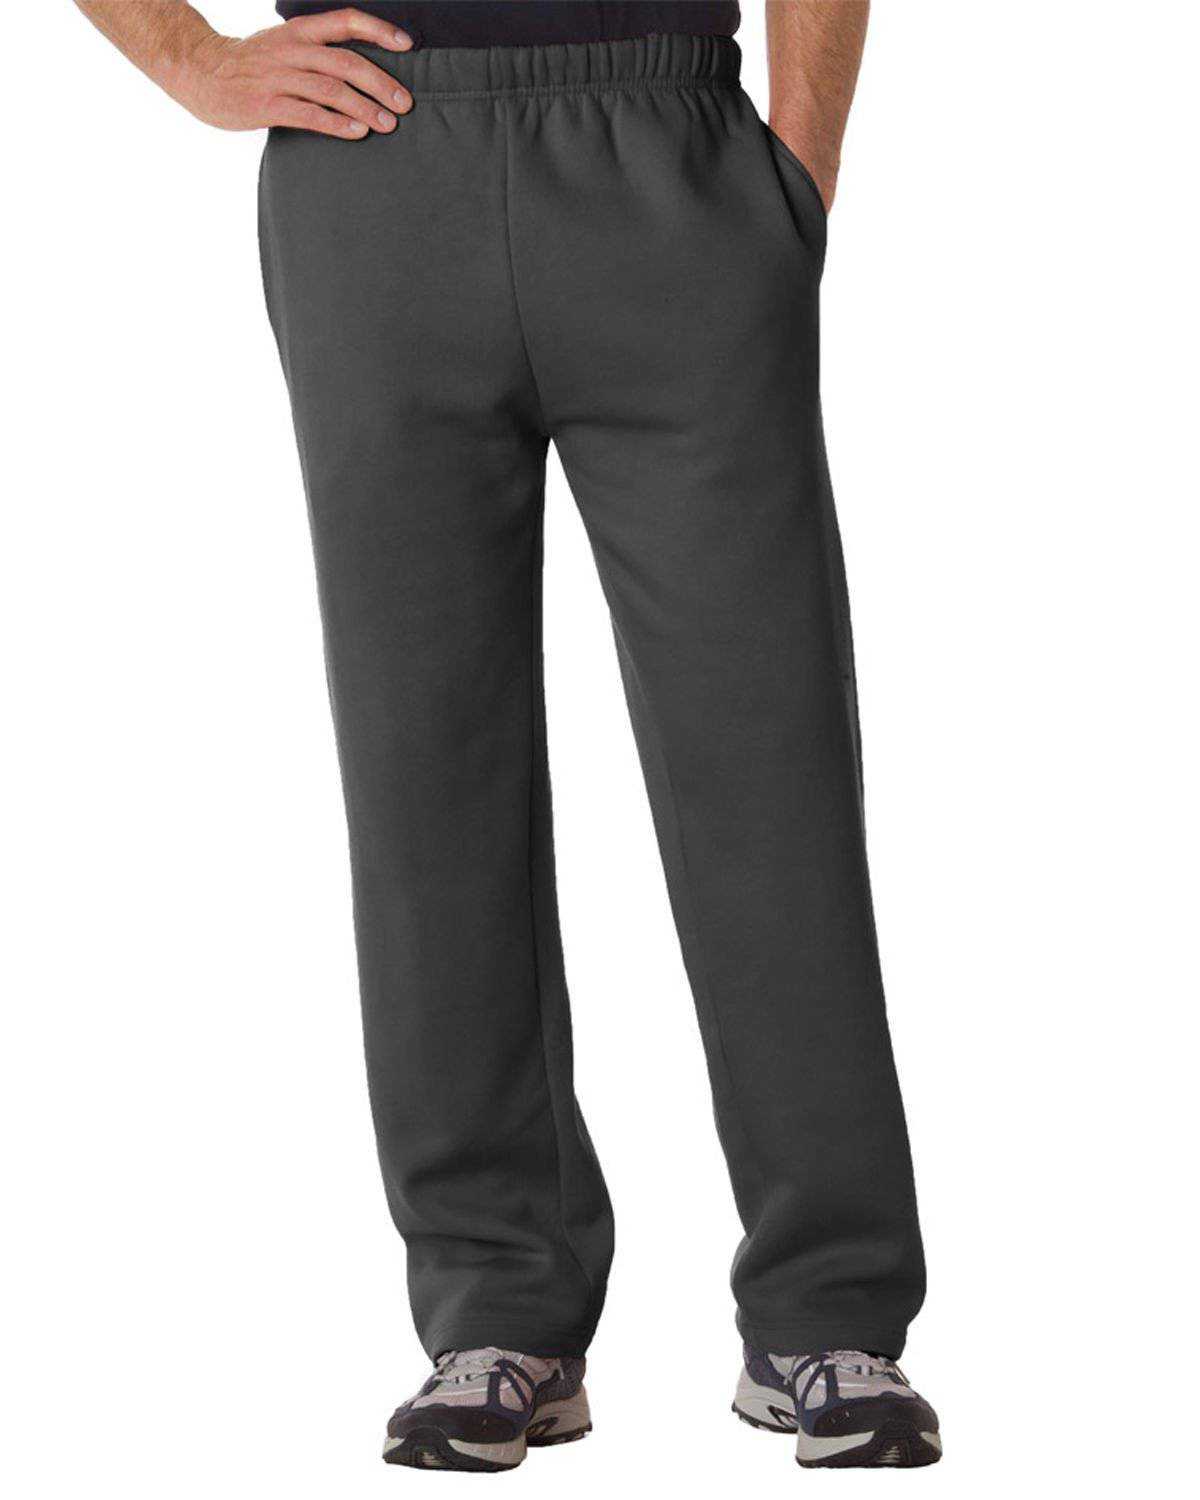 Badger Sport 2277 Youth Open Bottom Fleece Pant - Charcoal - HIT a Double - 1